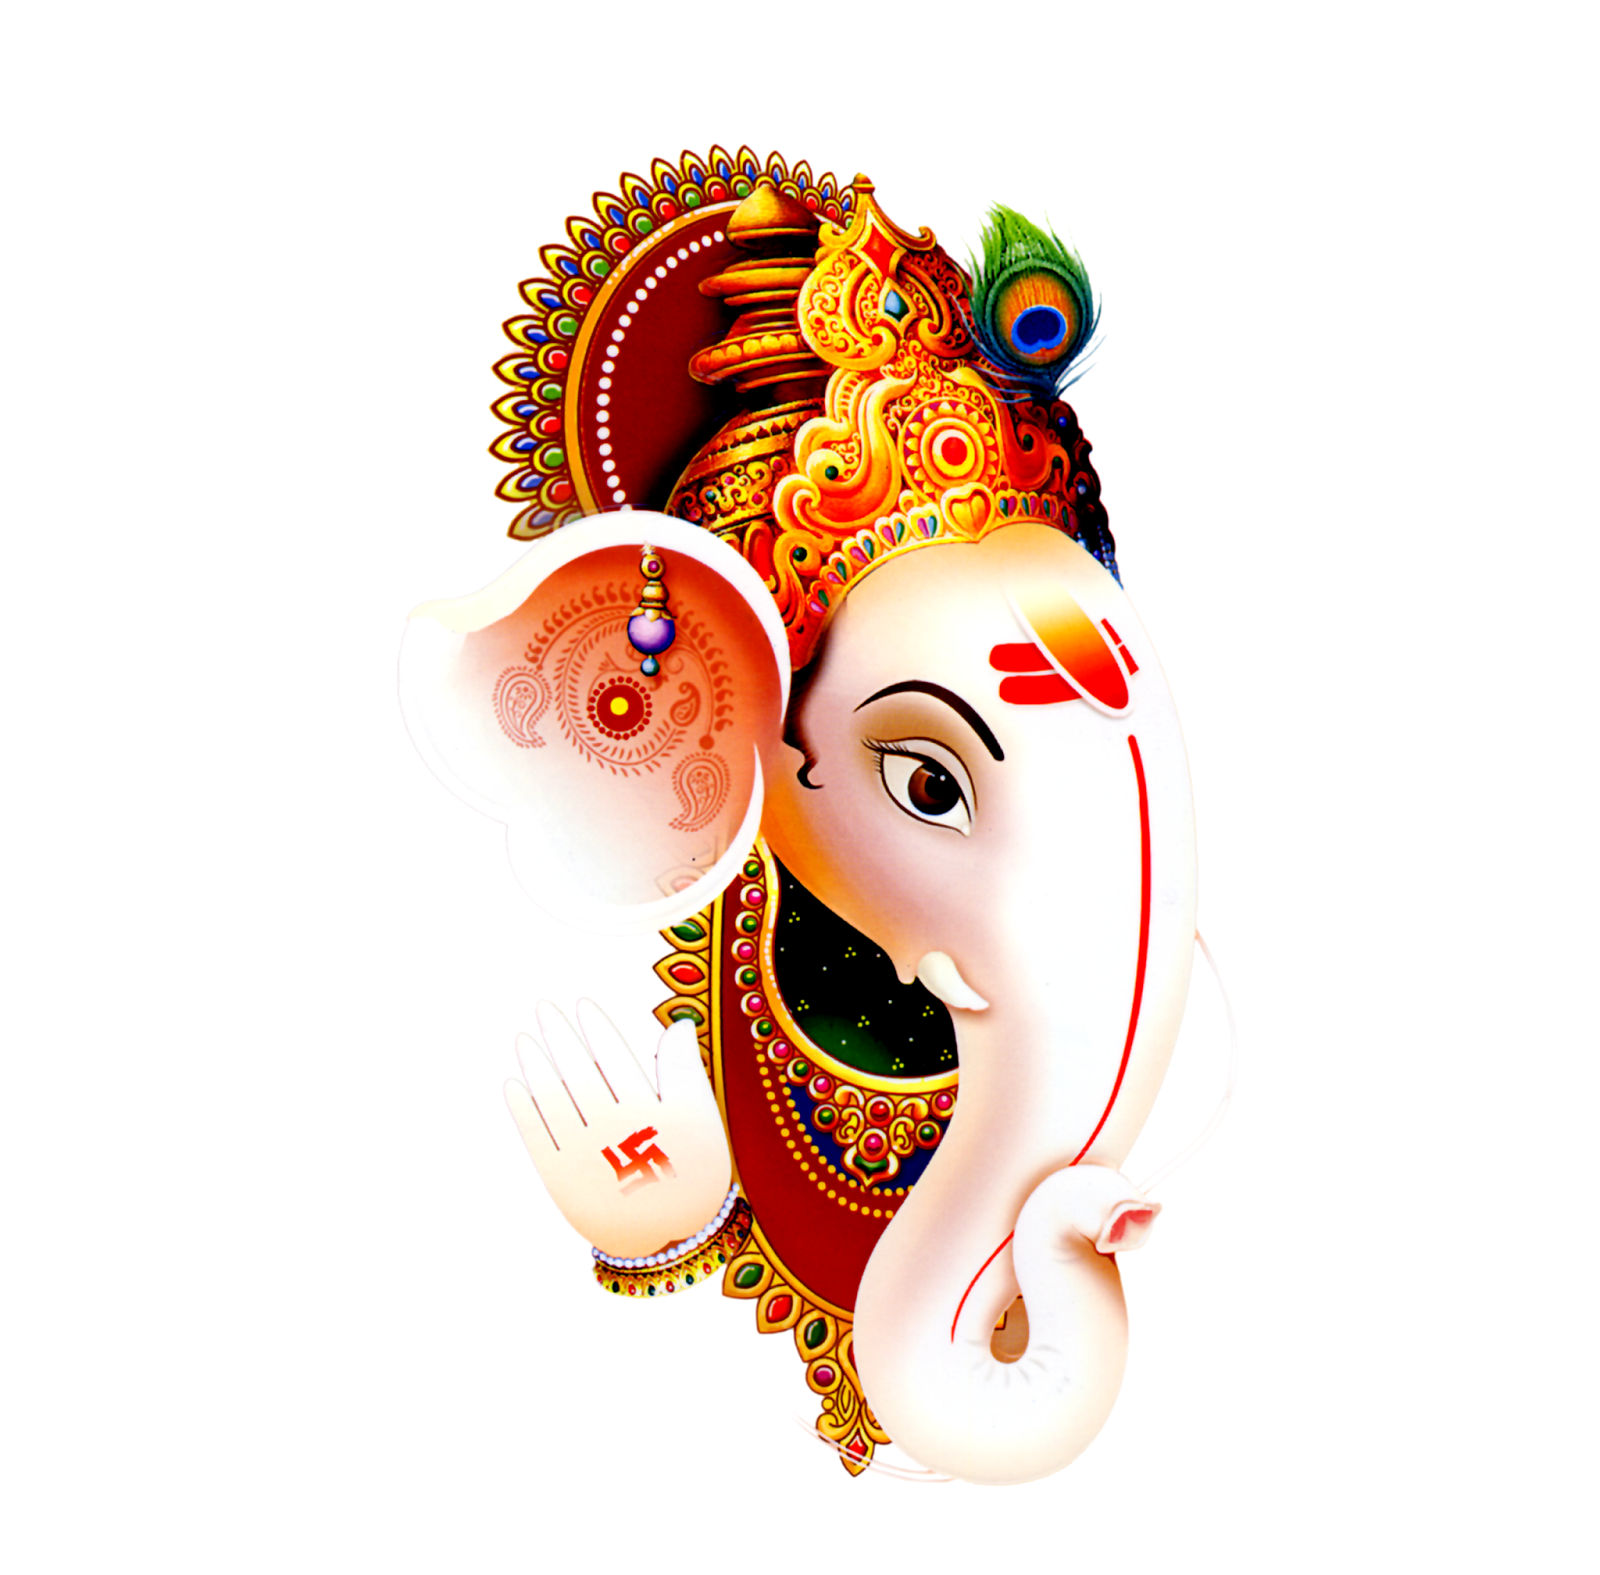 Grunge Ganesh Chaturthi Png Banner Free Download - Photo #31 - PngFile.net  | Free PNG Images Download